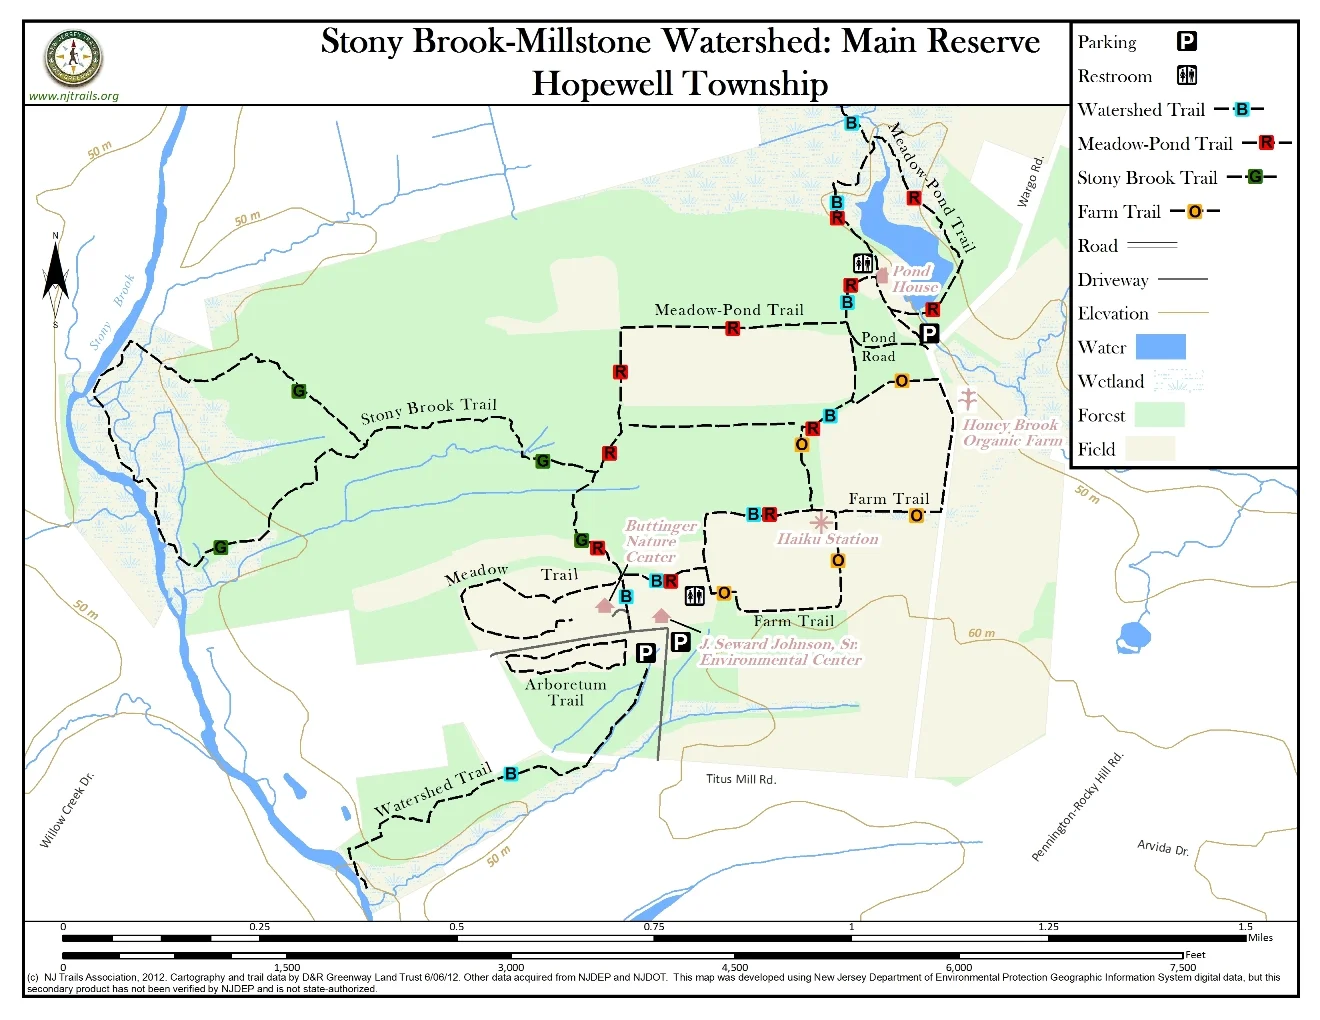 Stony Brook-Millstone Watershed: Main Reserve